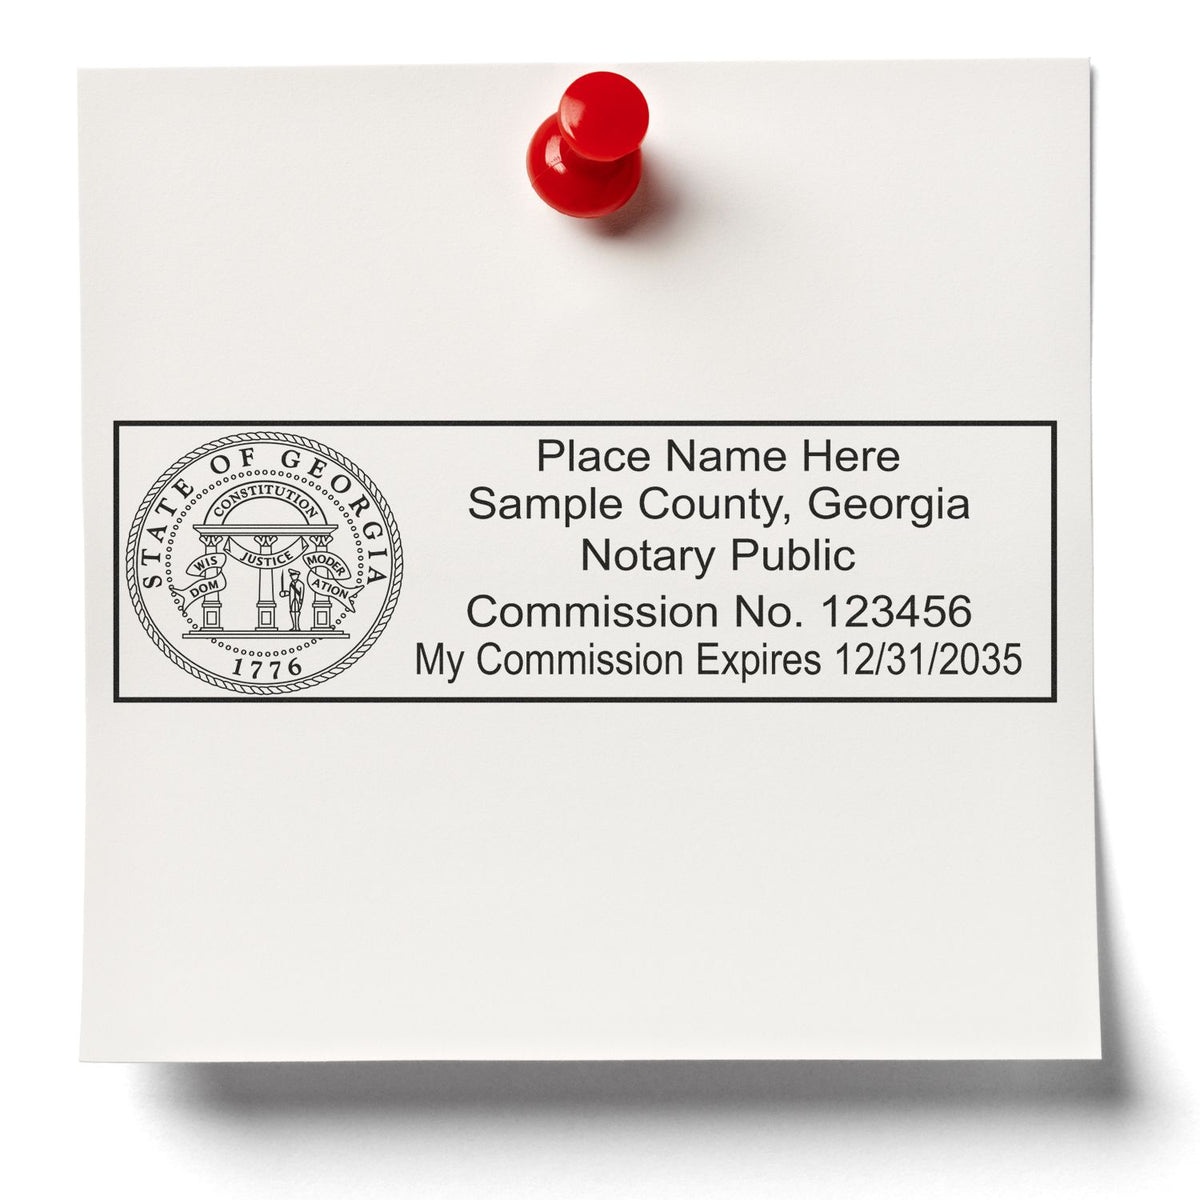 The Super Slim Georgia Notary Public Stamp stamp impression comes to life with a crisp, detailed photo on paper - showcasing true professional quality.